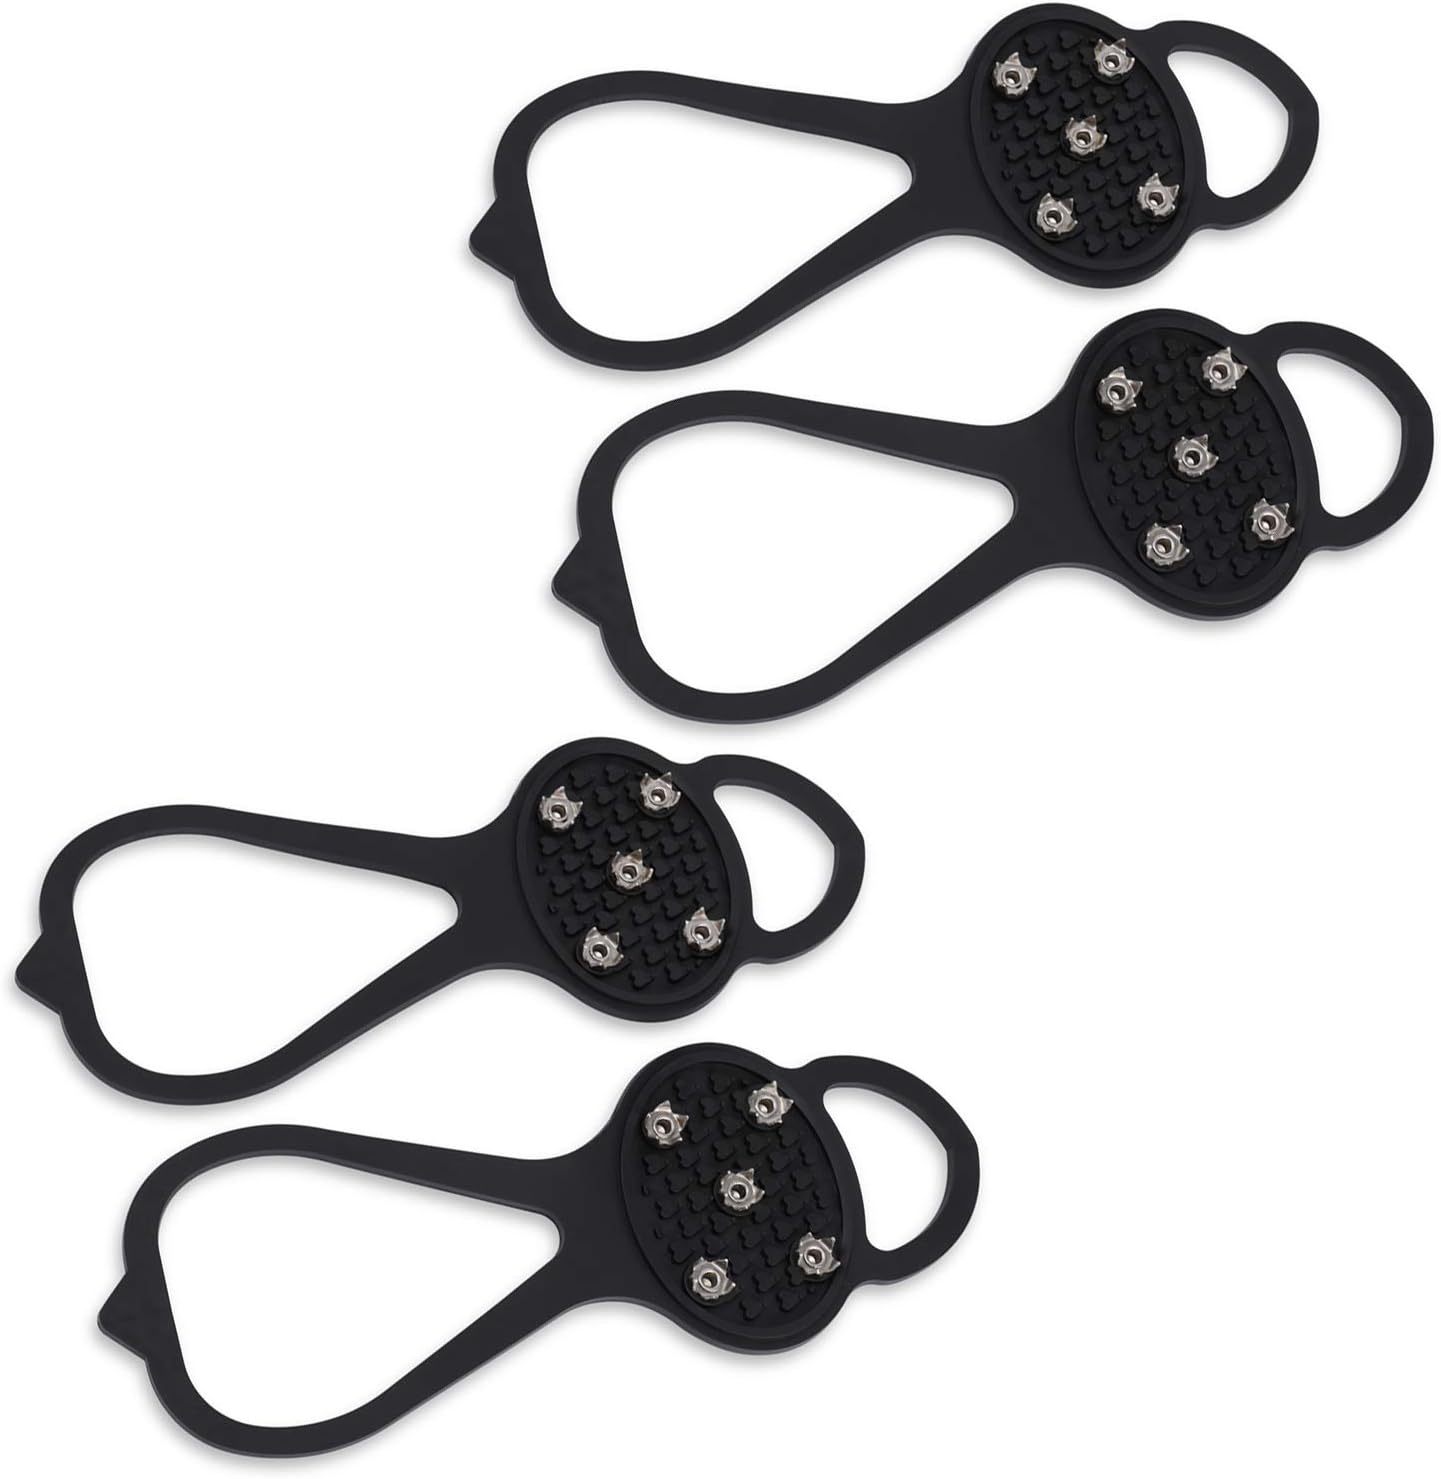 LACE INN 2 Pairs Non Slip Gripper Spike, Ice Grippers [...]